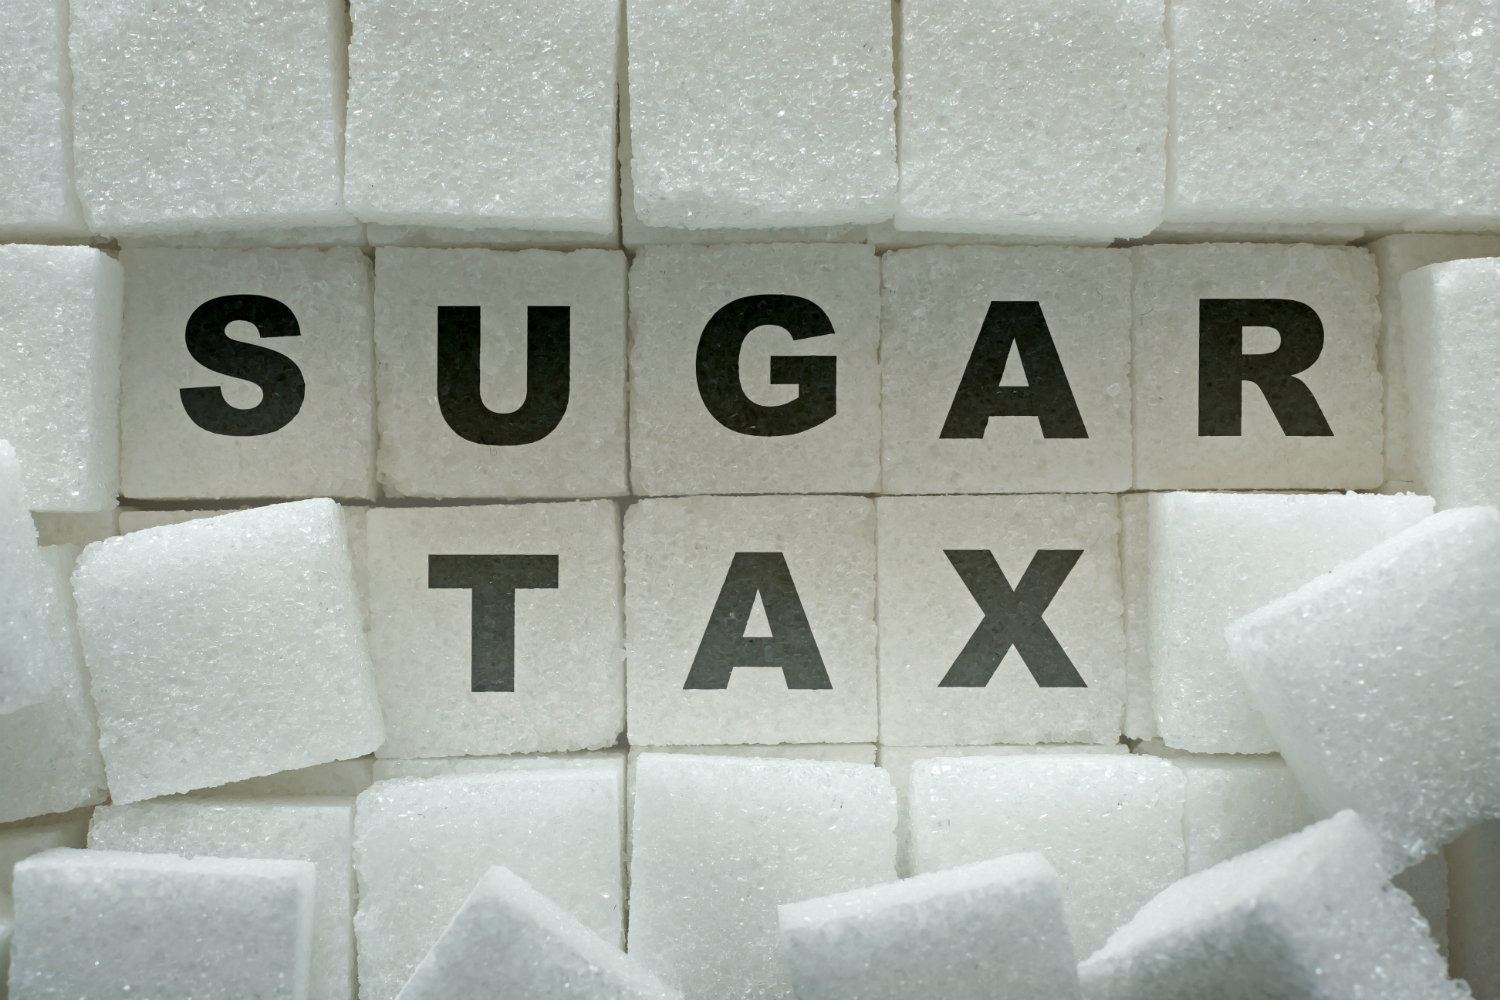 Sugar tax is a good start to help the health of the nation